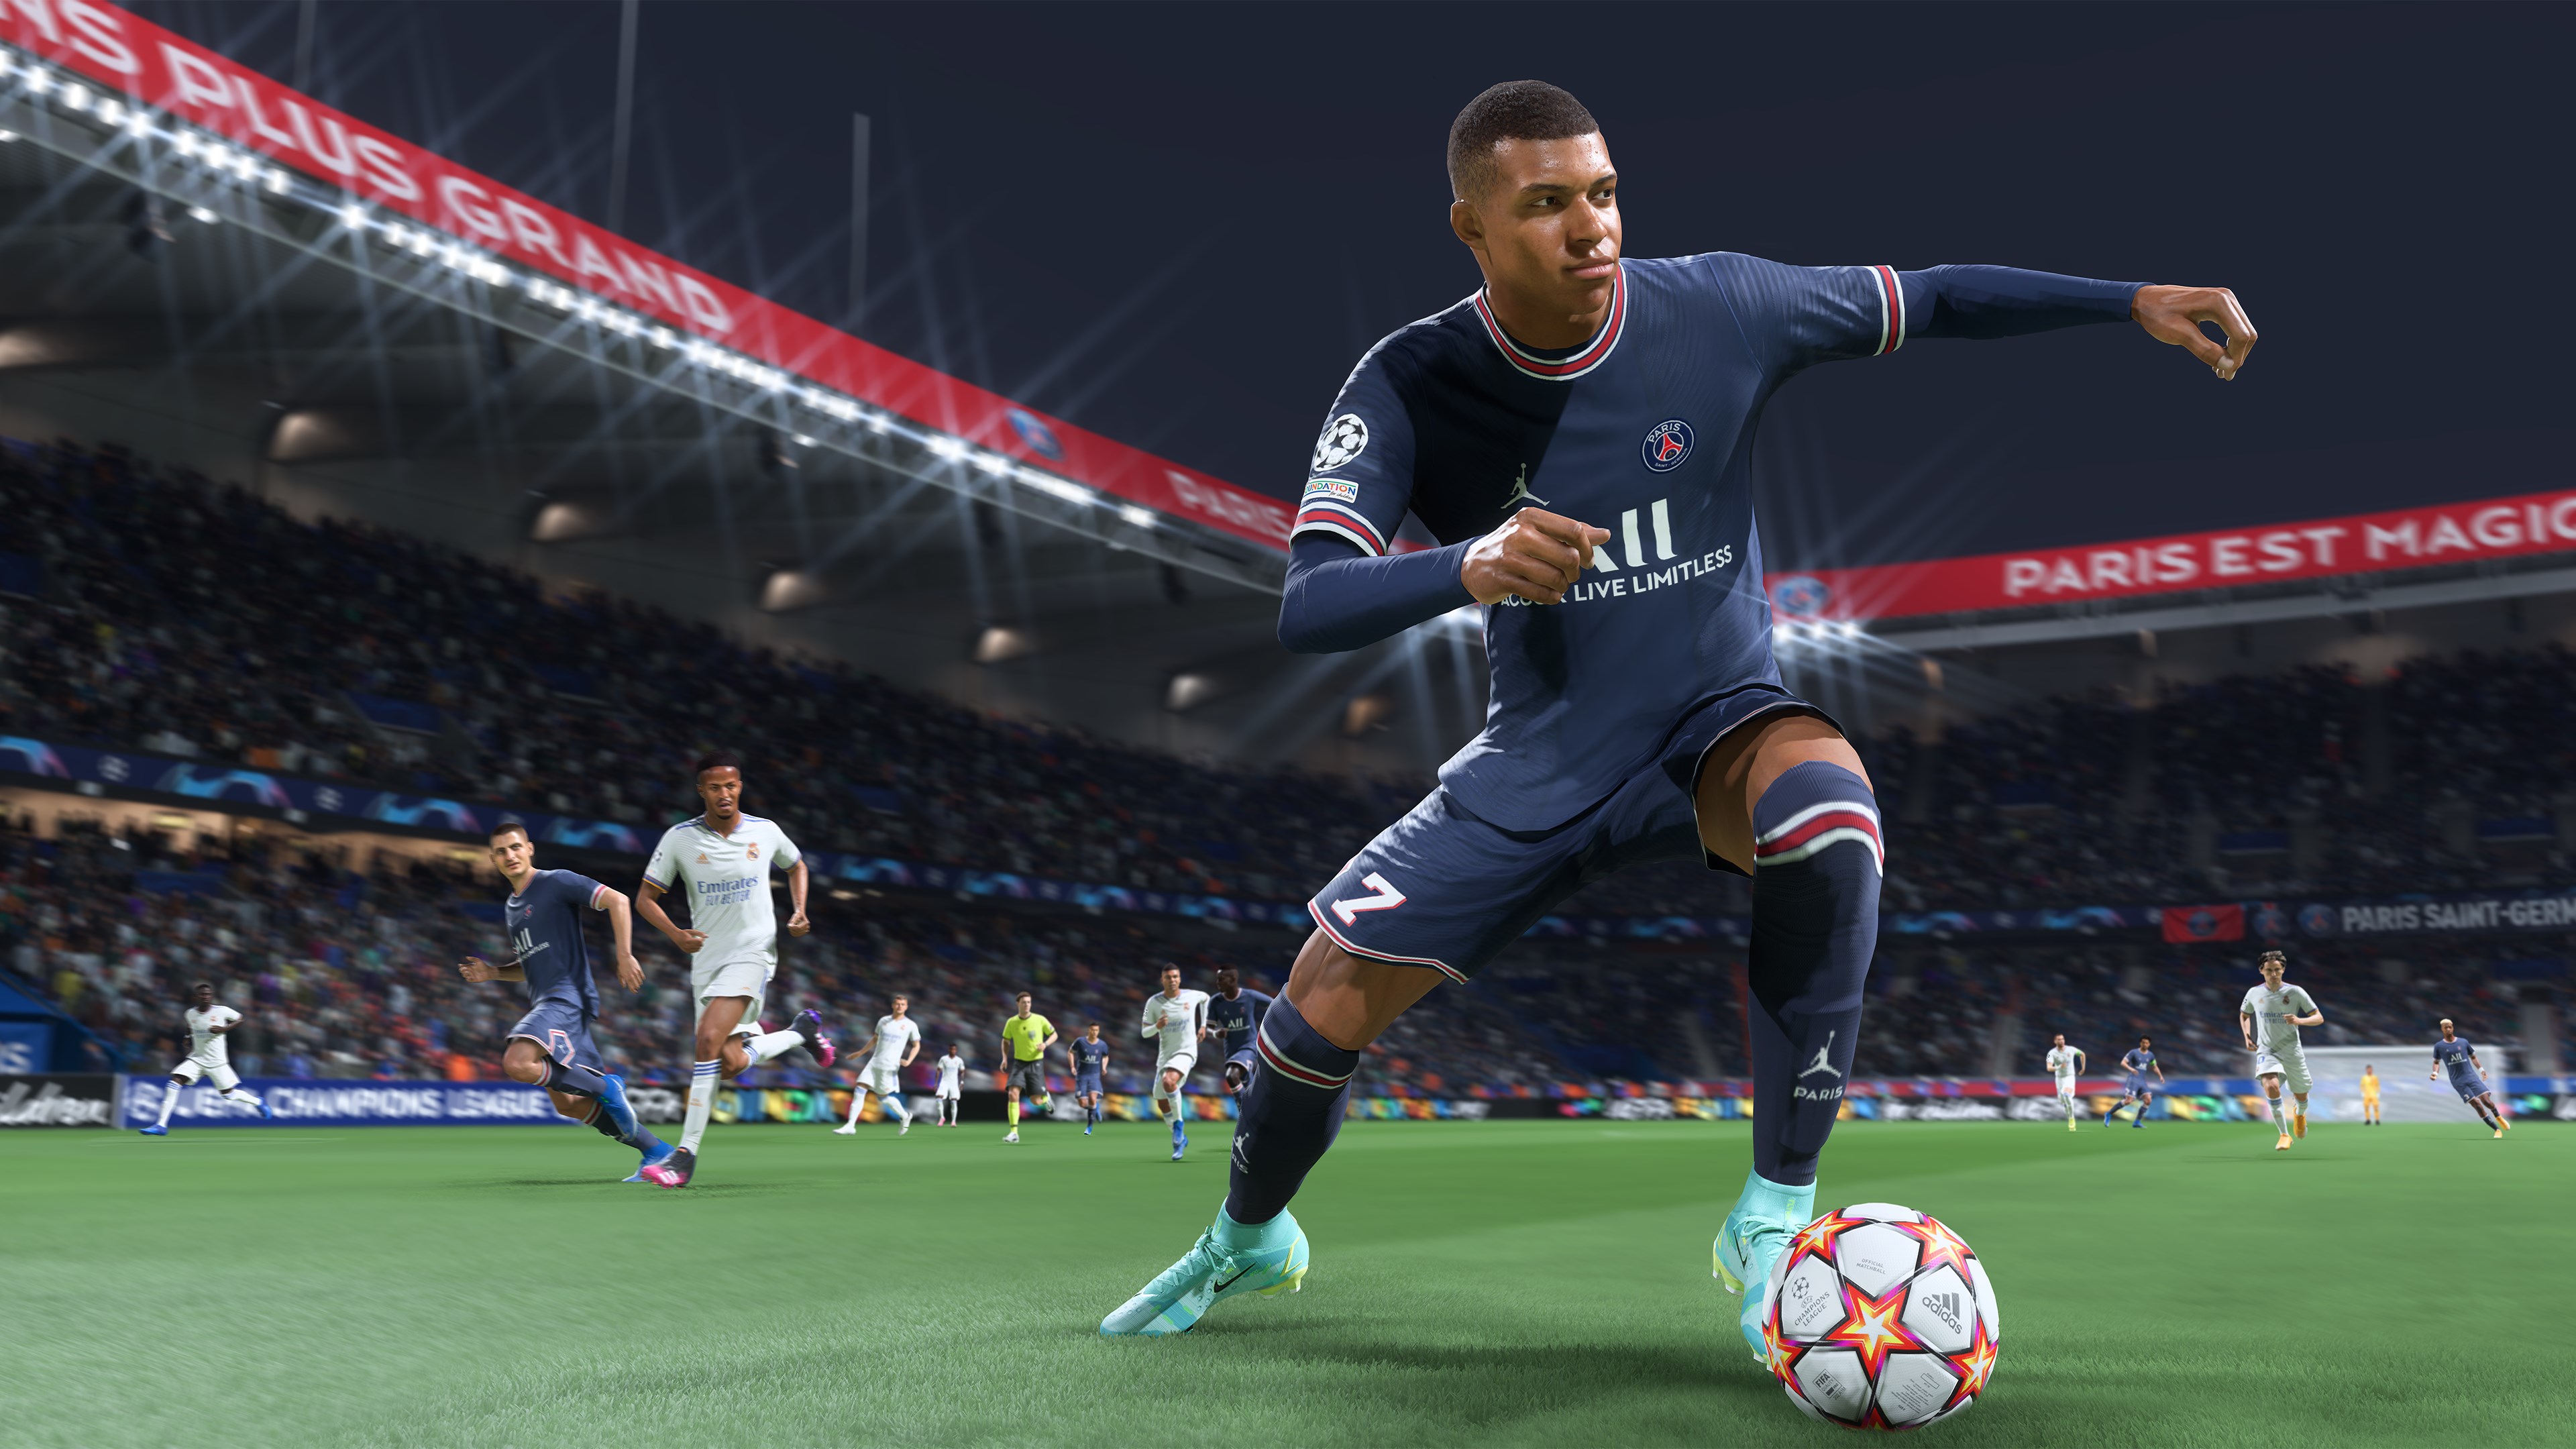 FIFA 23 Release Date, Crossplay and Womens World Cup Mode Rumors, Plus Expected Price